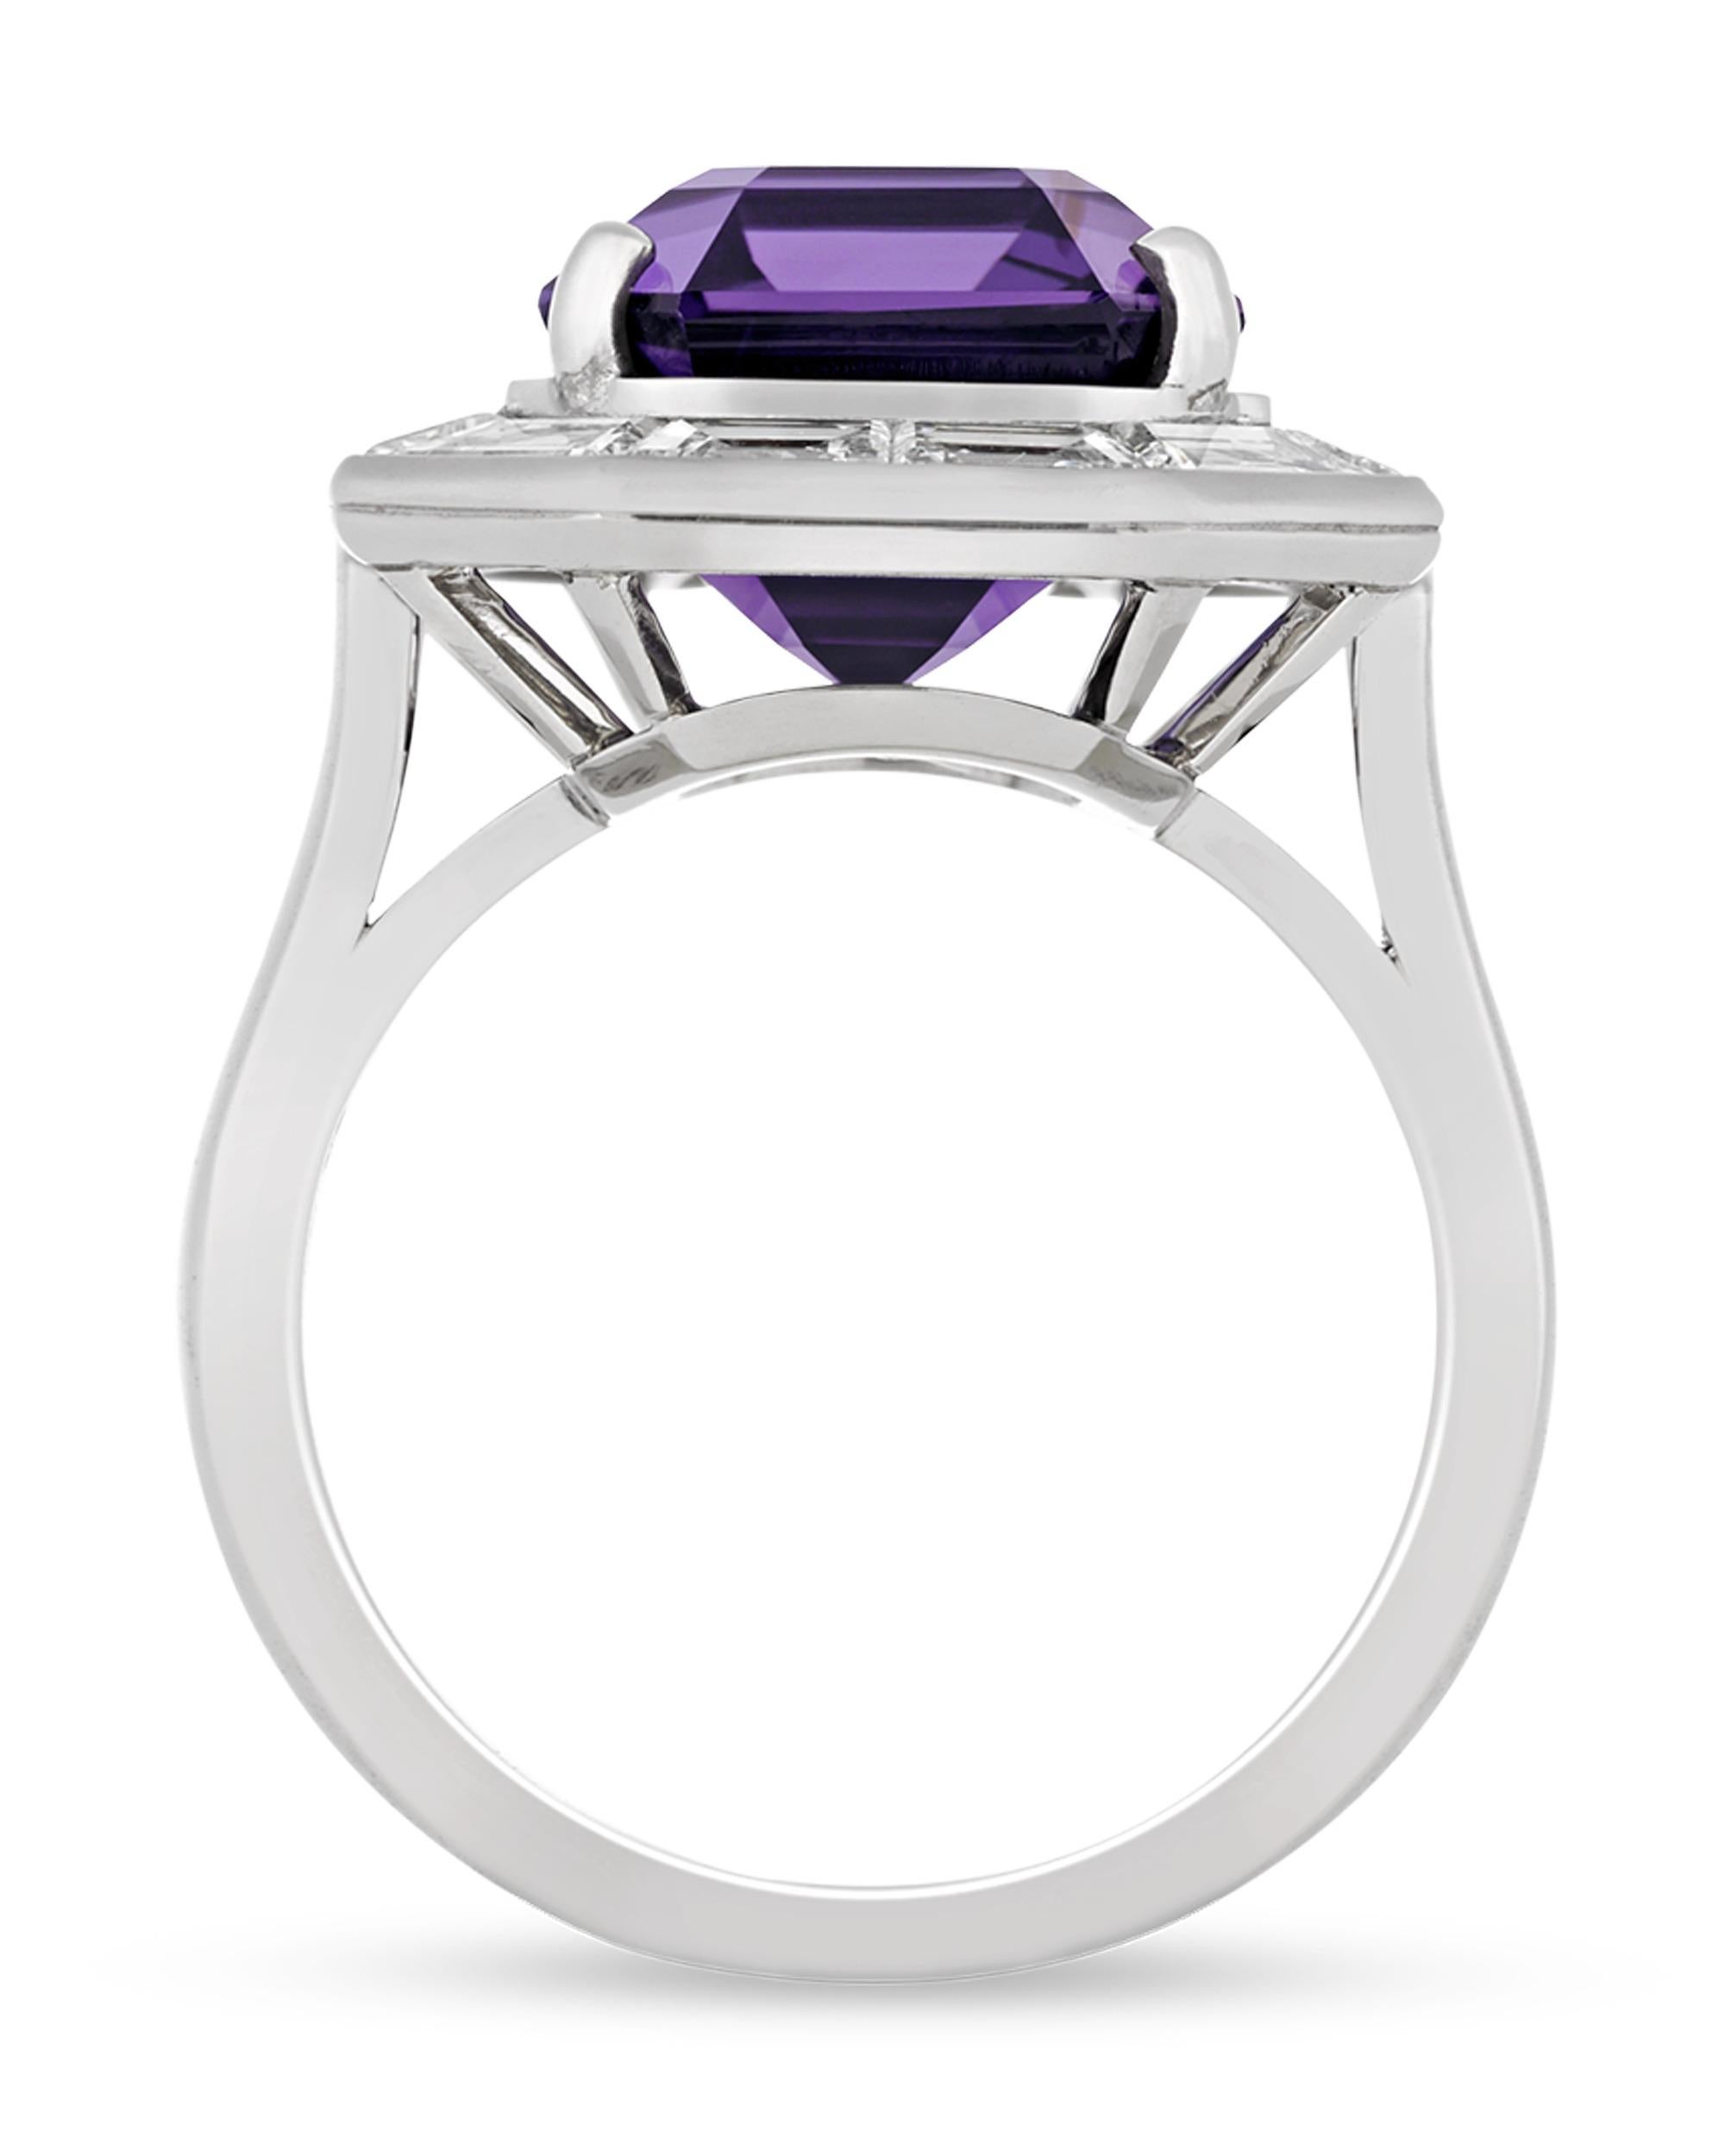 A 10.86-carat fancy purple sapphire displays its extraordinary hue at the center of this octagonal ring. Purple sapphires stand among the most sought-after colored gemstones and are highly treasured among gem collectors, and this example is